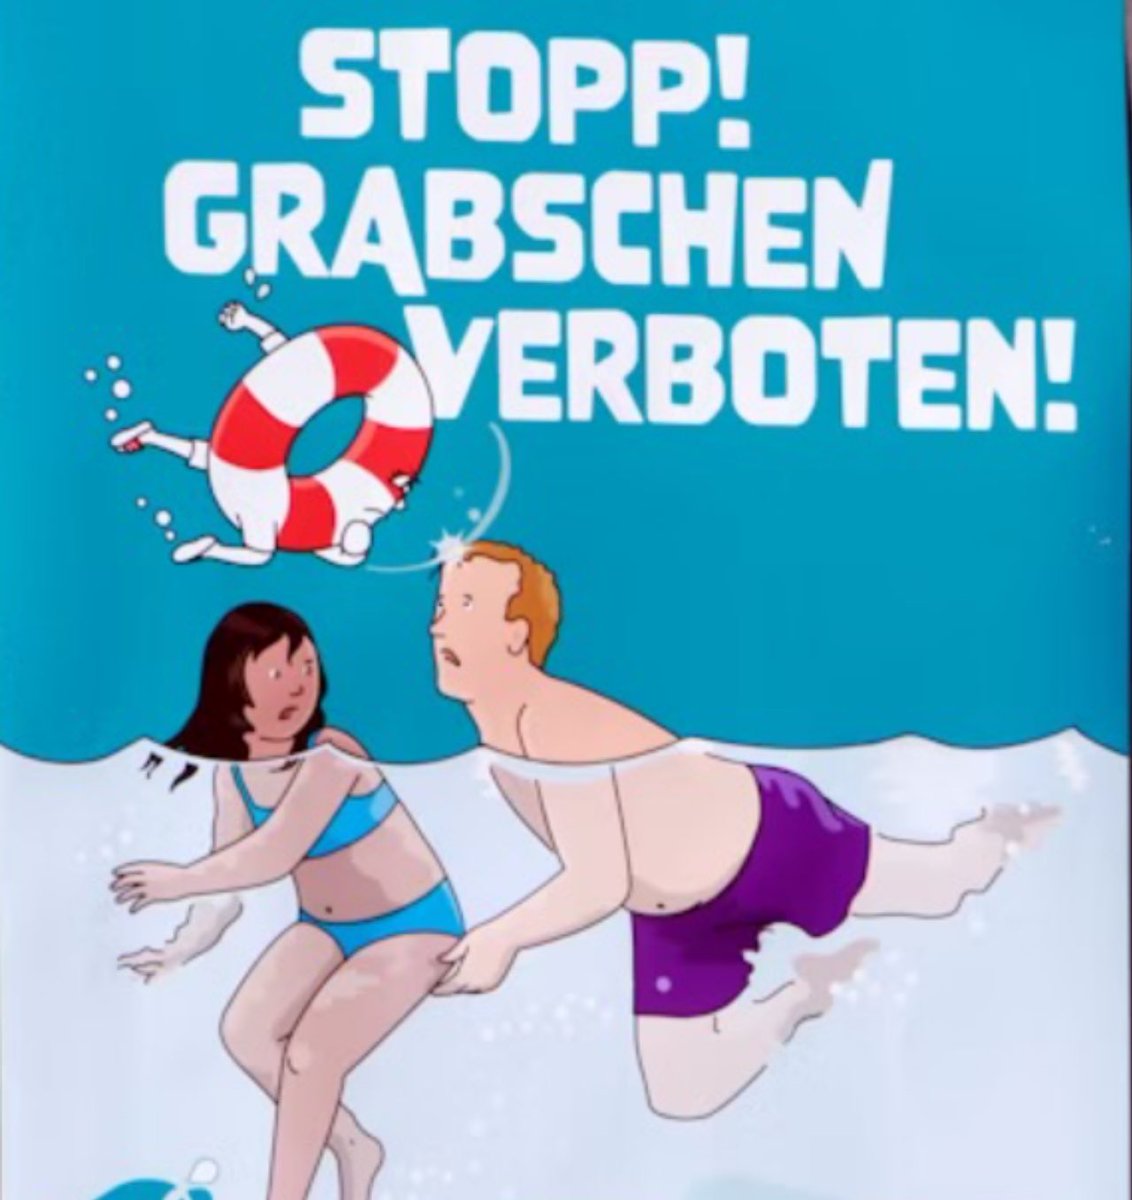 Apparently the Germans have a problem with middle aged men touching up girls at Swimming baths? In recent years it has become so bad they now need posters to tell them it’s not allowed.